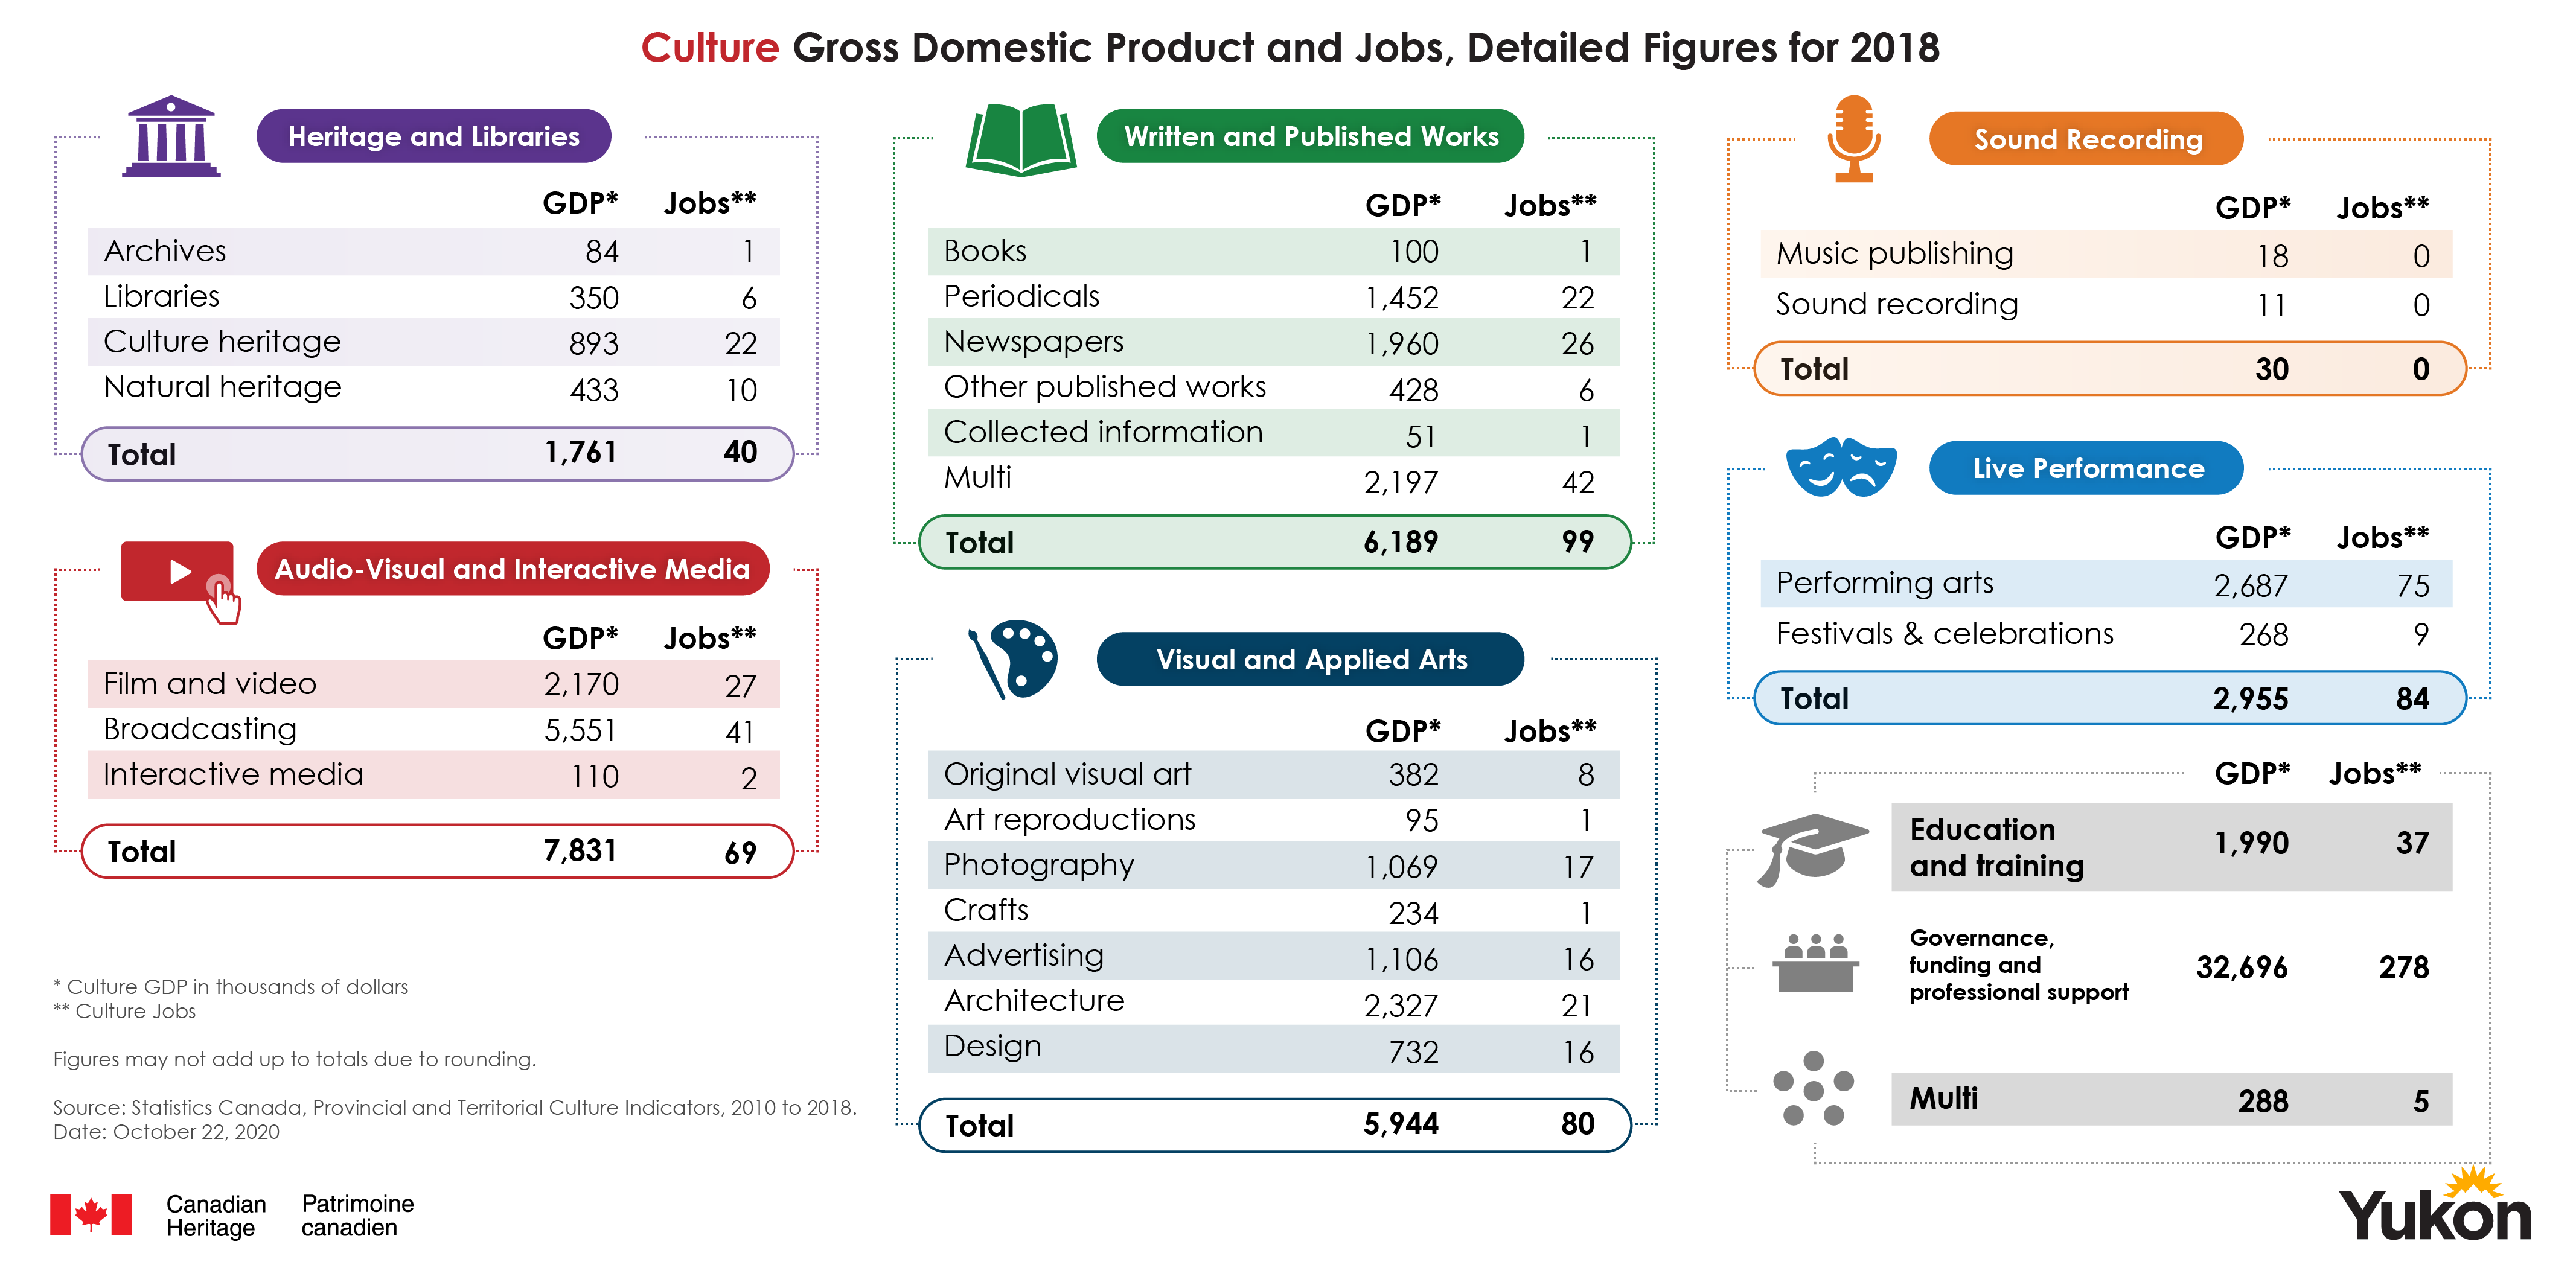 Culture Gross Domestic Product and Jobs, Detailed Figures for 2018